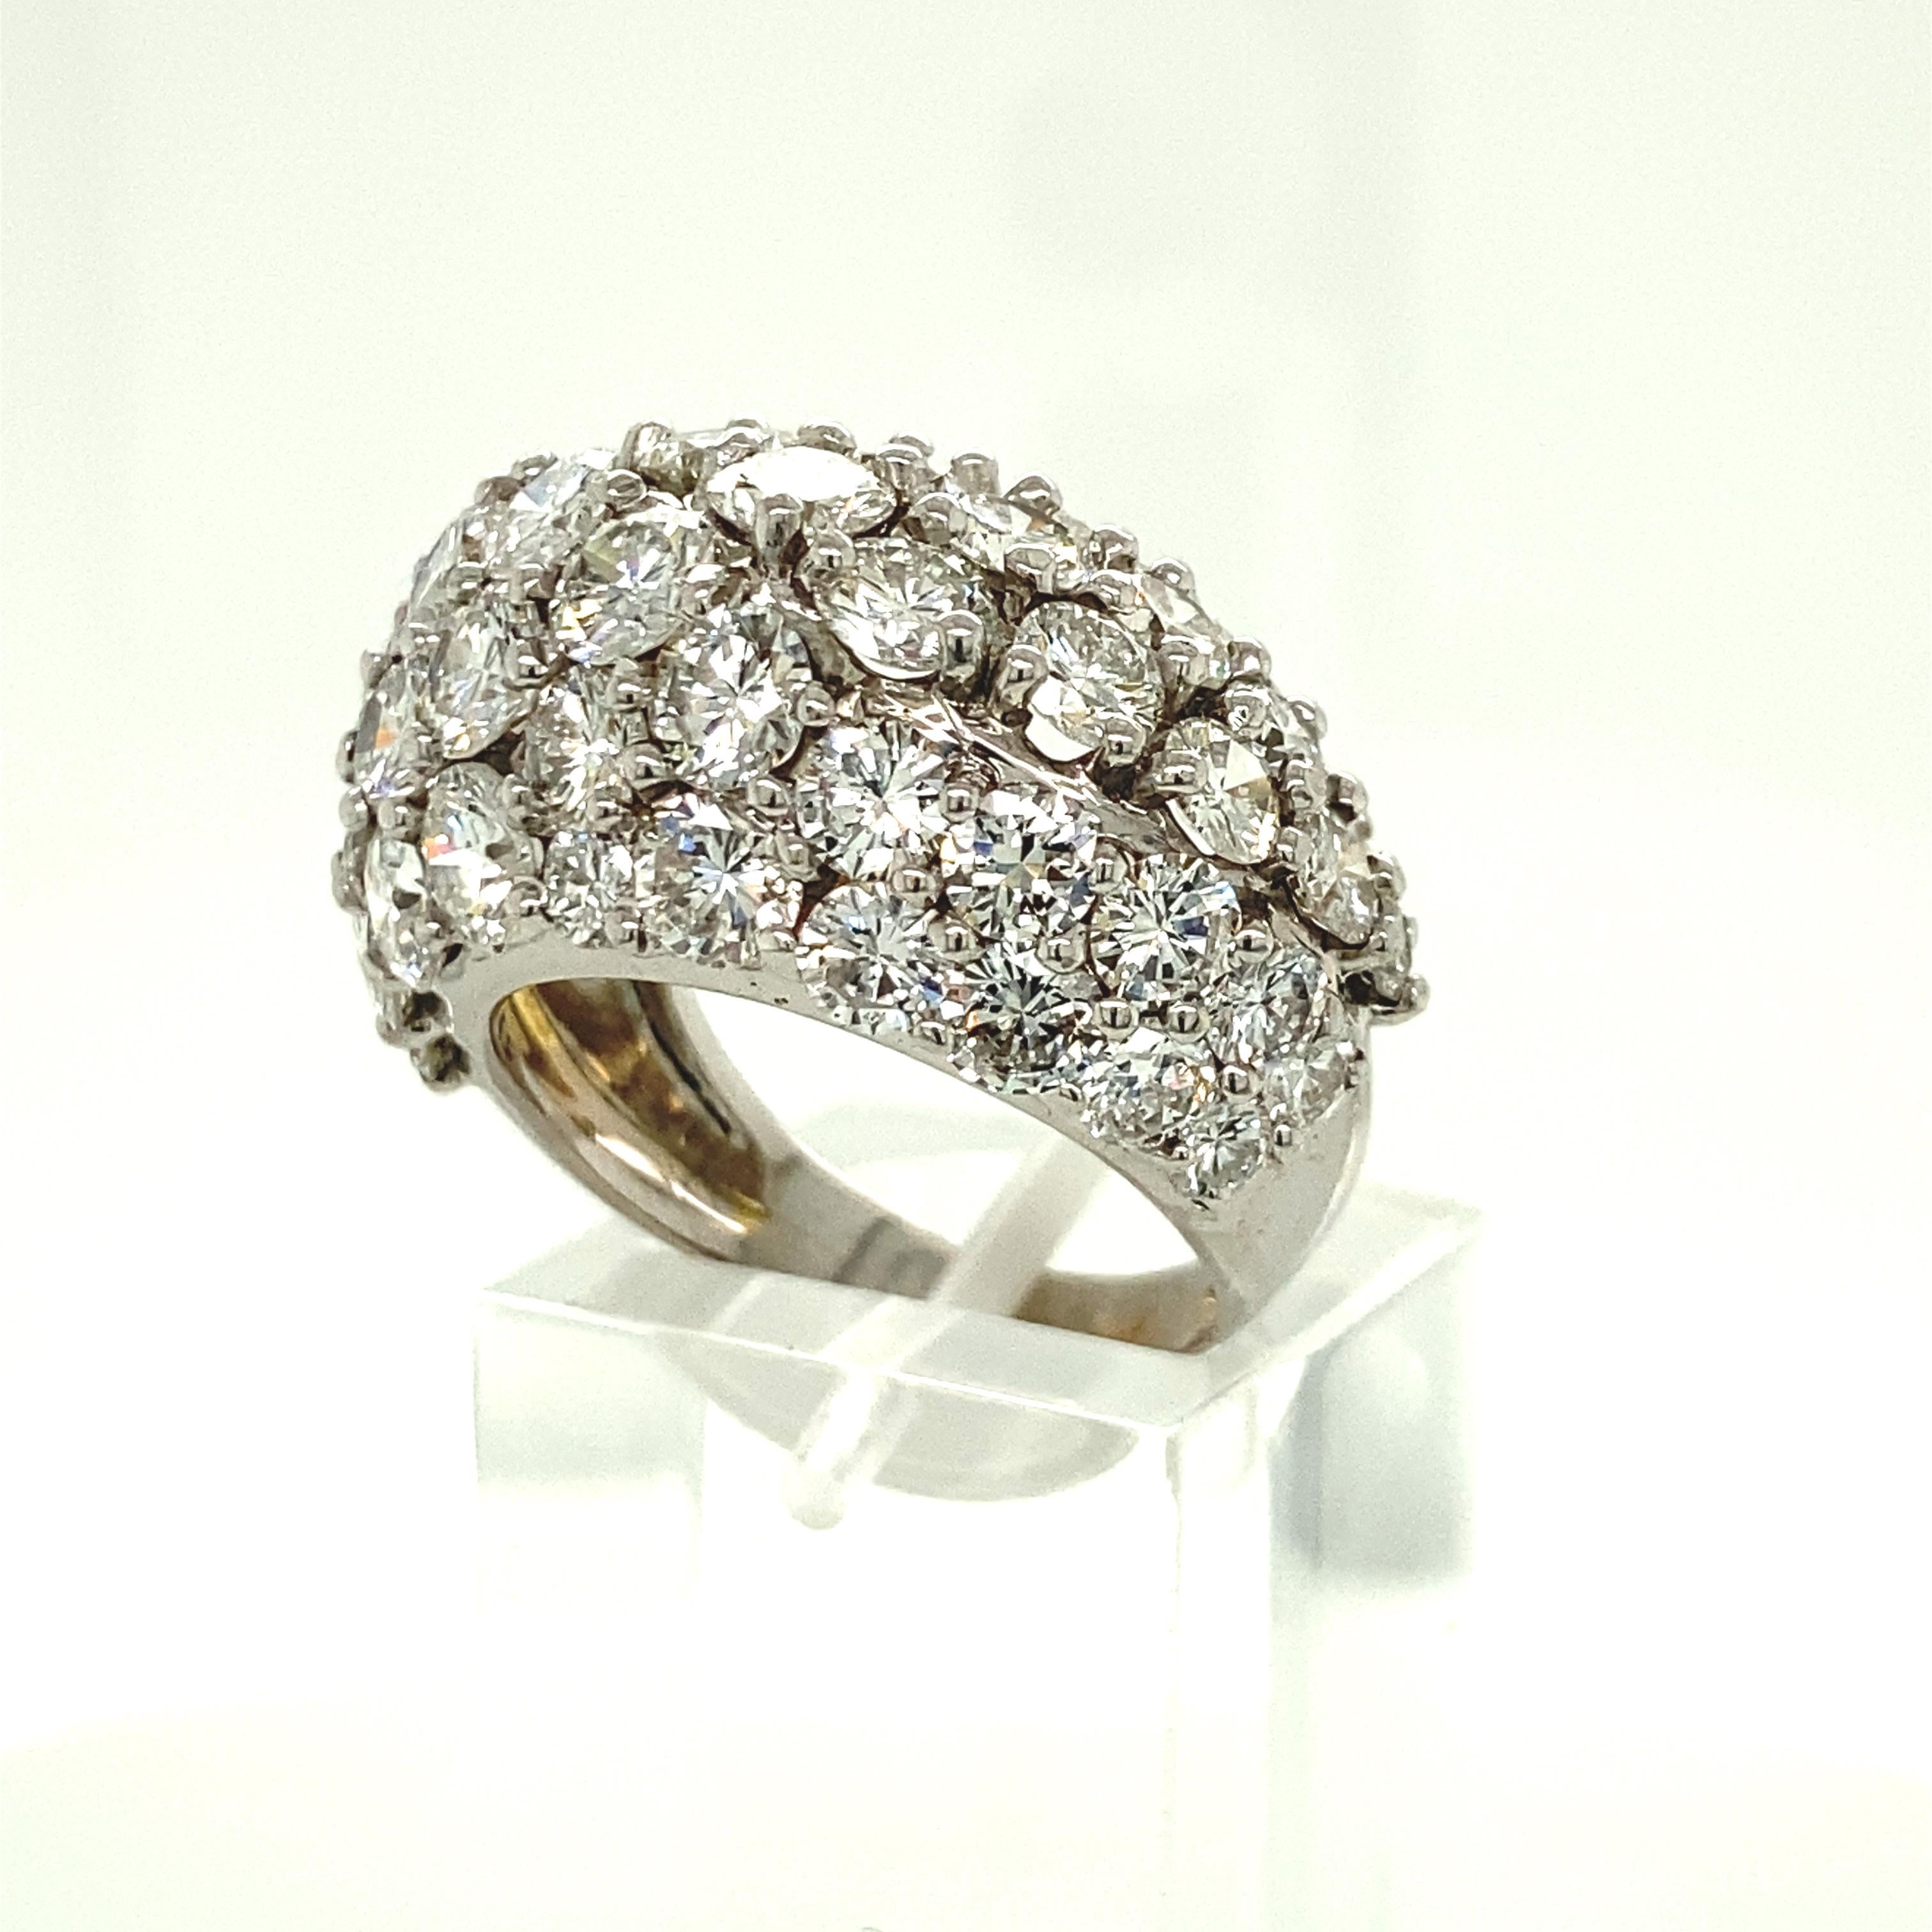 With this White Gold and 6.5 Karat Dome Diamond Ring your ring will dazzle and sparkle in even the lowest lighting. This ring is the perfect way to wear diamonds all day, currently sized to a 7 this ring is a perfect way to share your love this